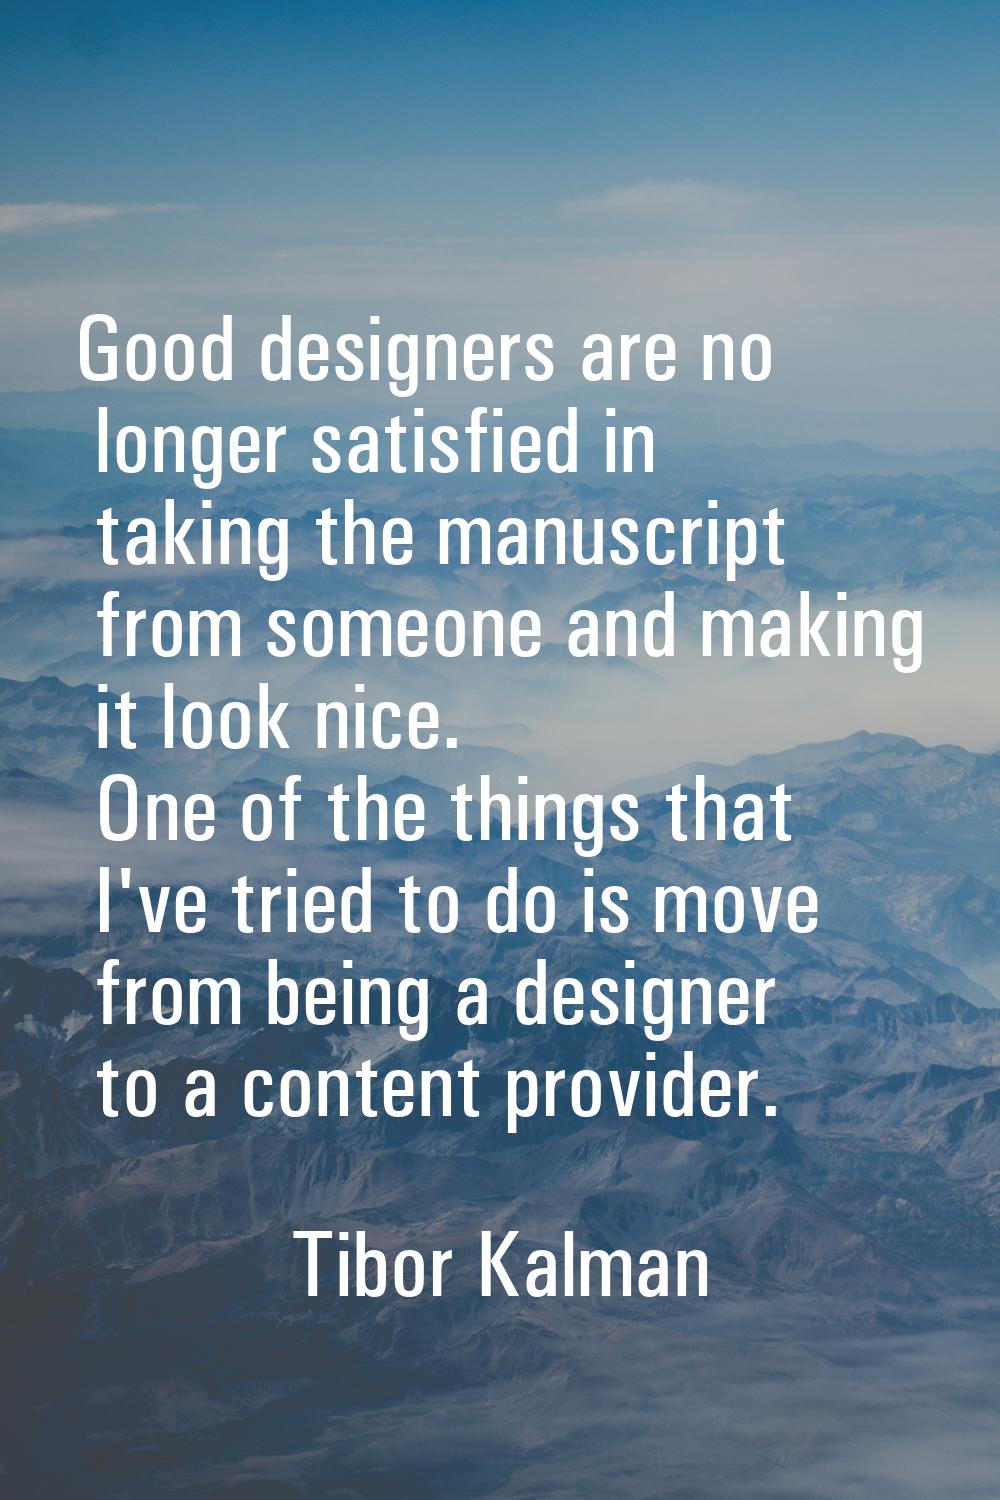 Good designers are no longer satisfied in taking the manuscript from someone and making it look nic